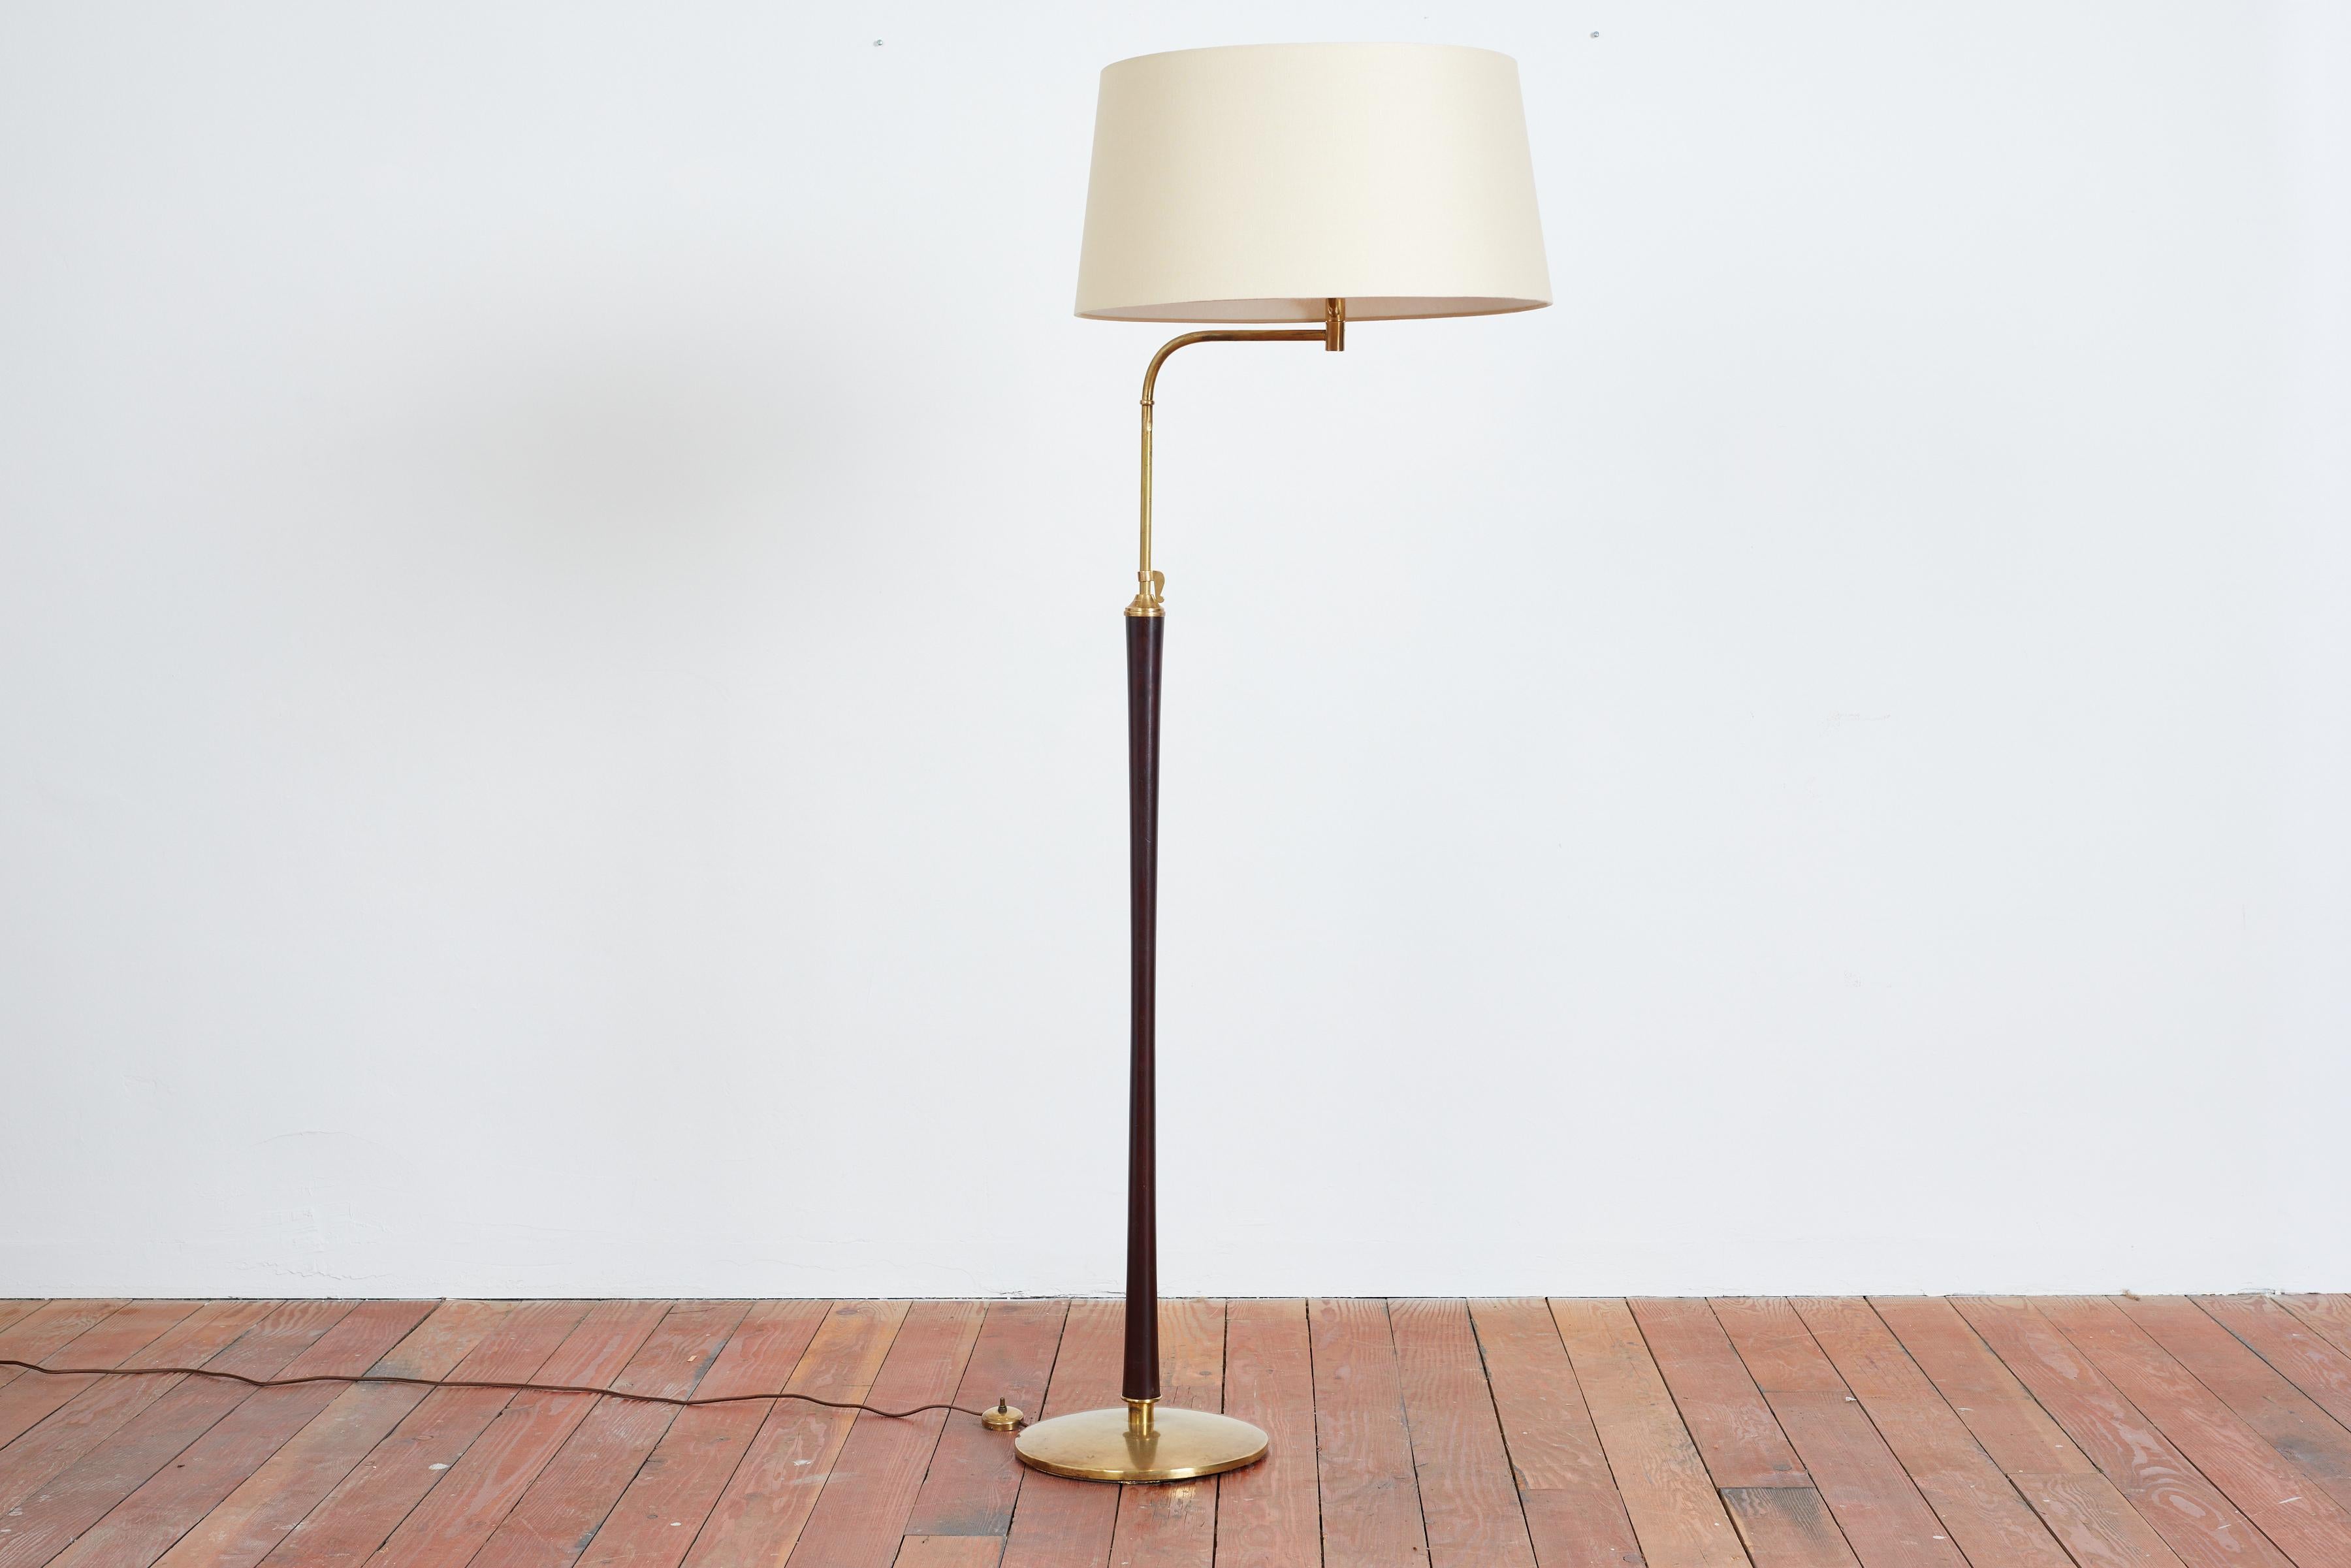 Italian mahogany floor lamp in the style of Arredoluce 
Articulating brass neck with joint that extends the reach of the arm. 
Brass base and mahogany stem with wonderful patina
New silk shade. 
Italy, 1950s

